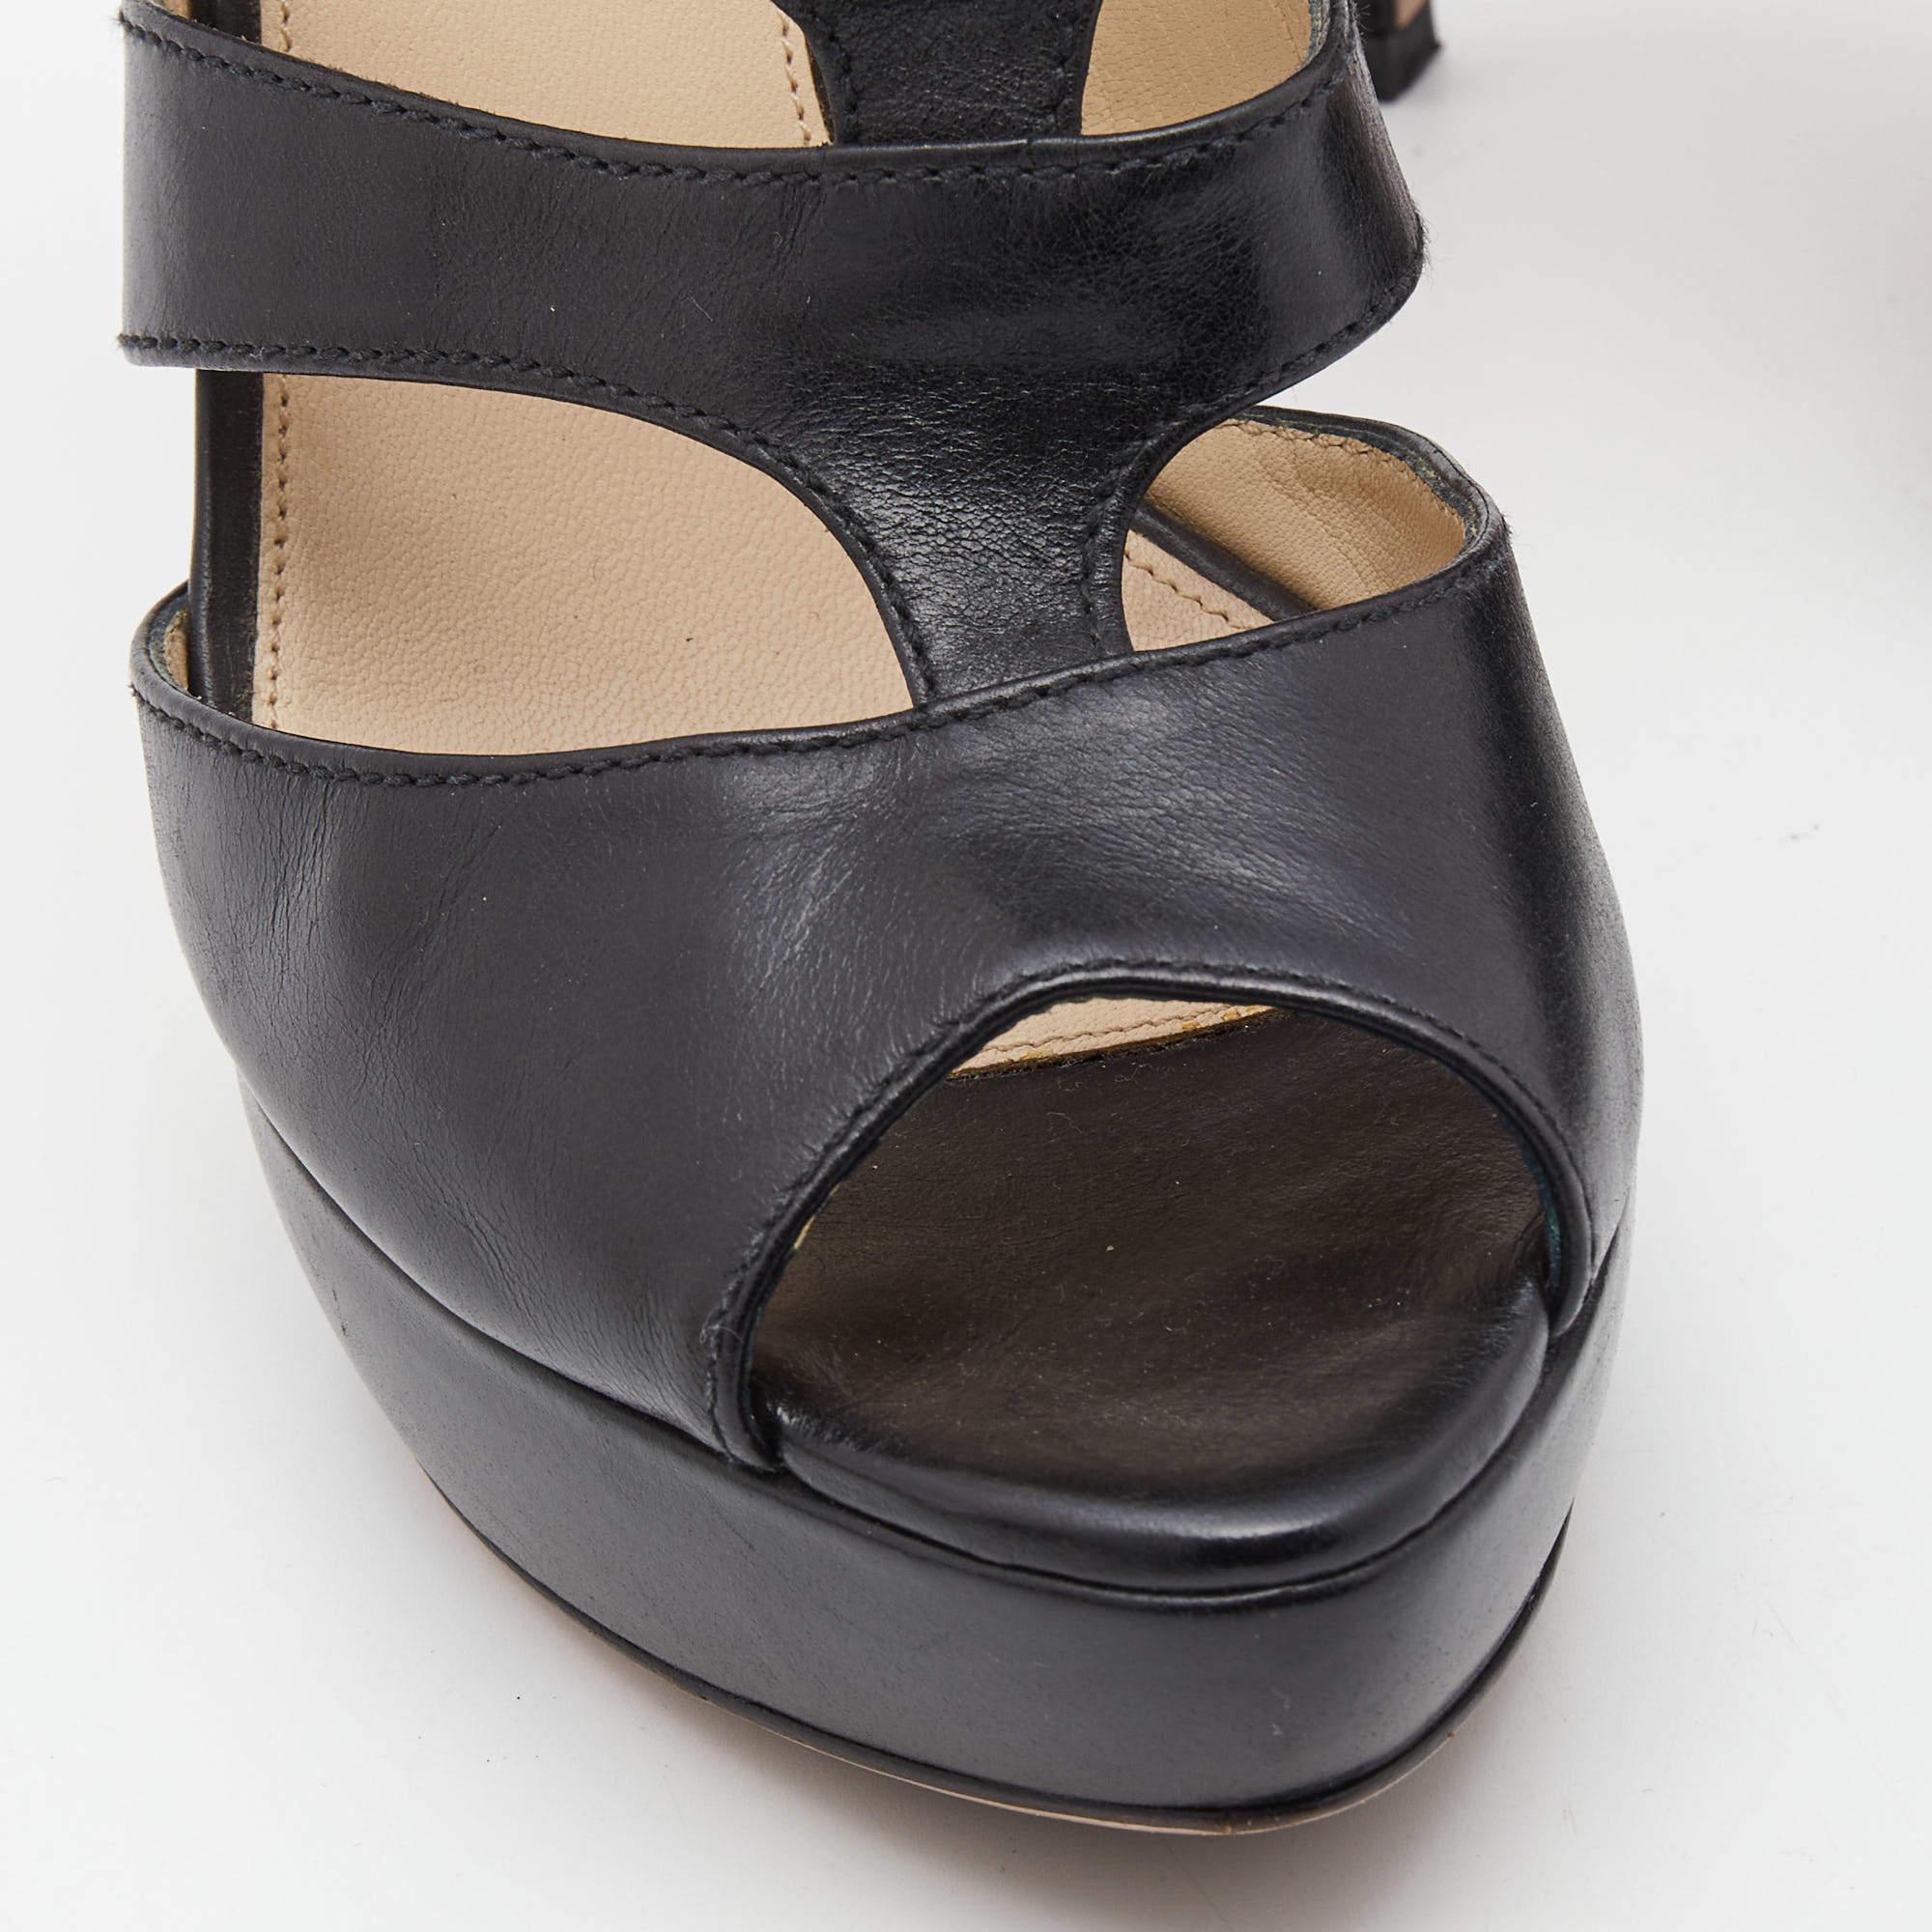 Prada Black Leather Strappy Sandals Size 39.5 For Sale 2